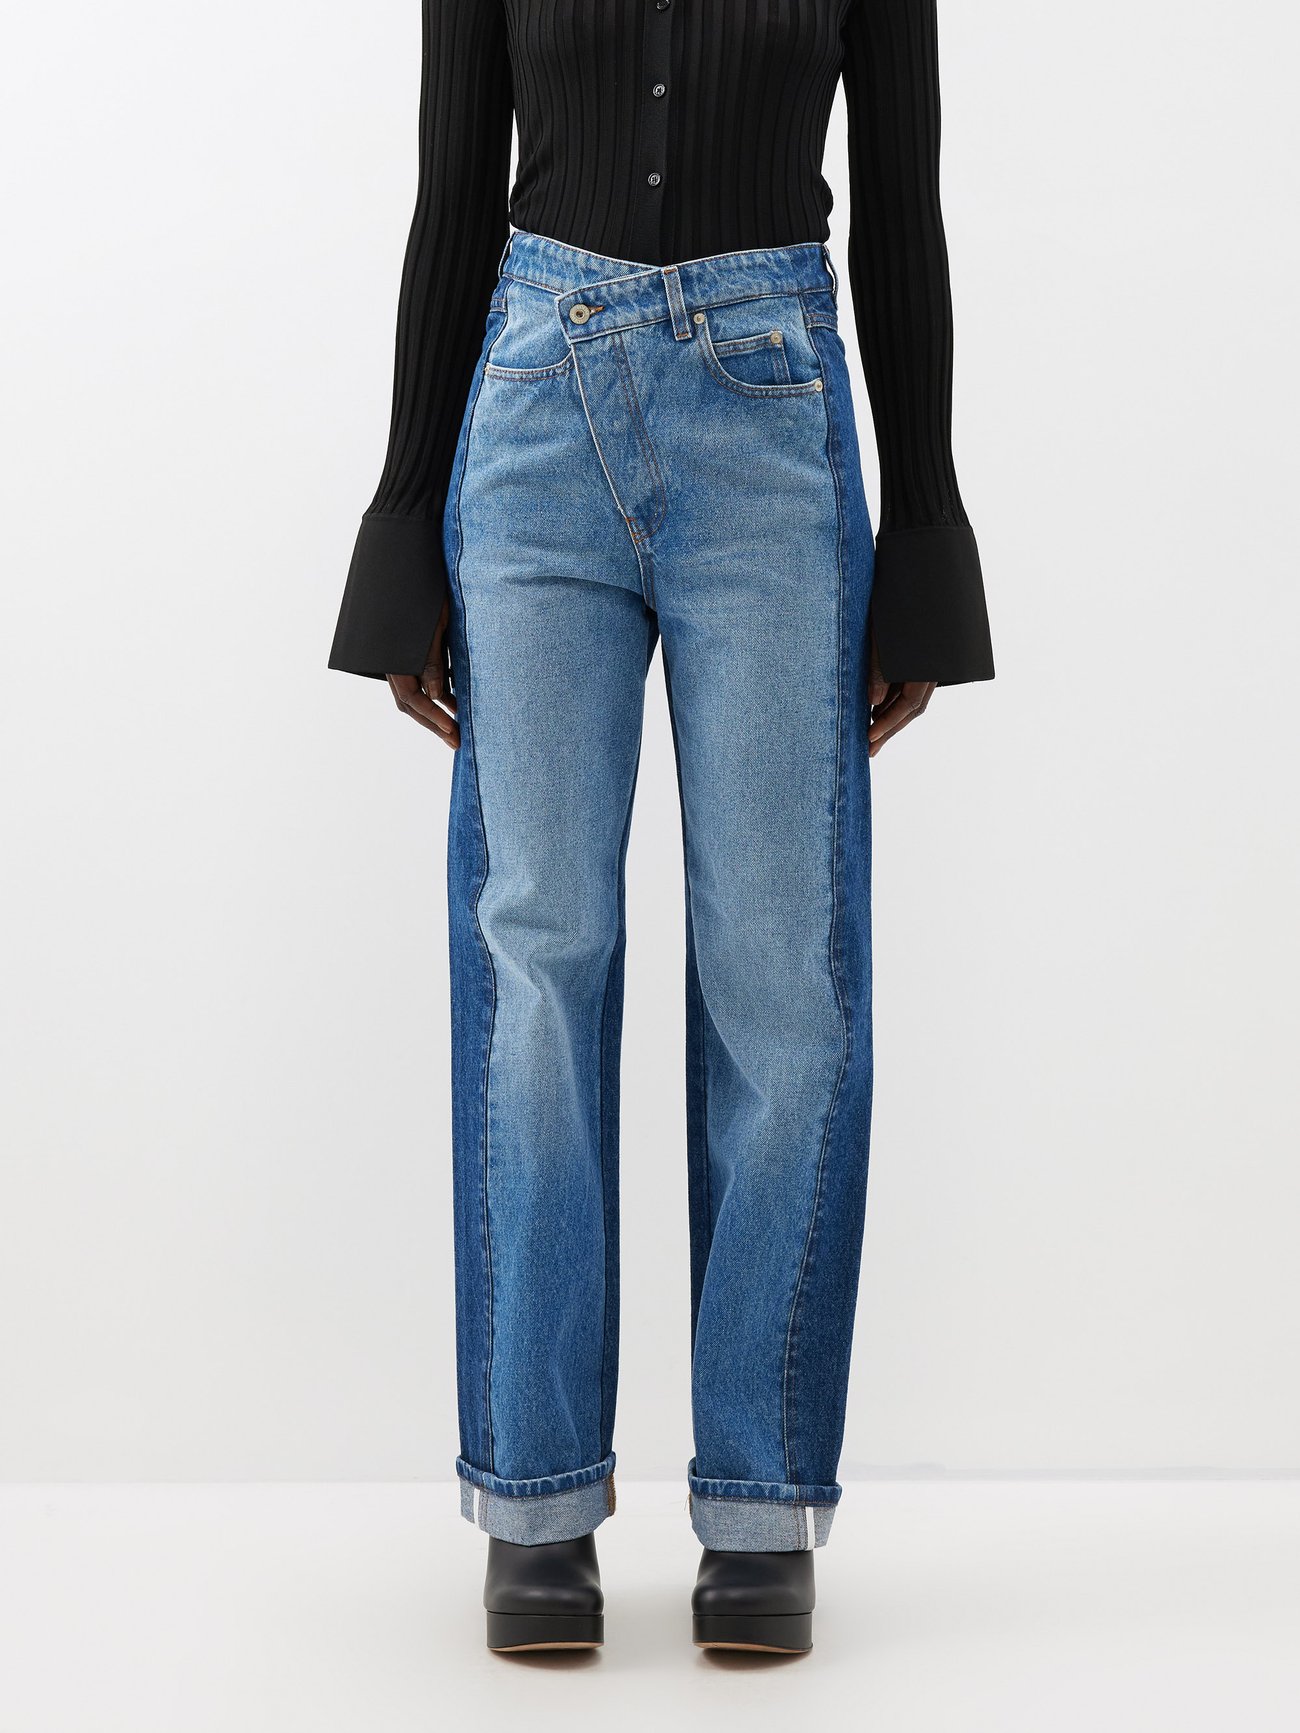 Blue Trompe L'oeil deconstructed two-tone jeans | LOEWE | MATCHES UK